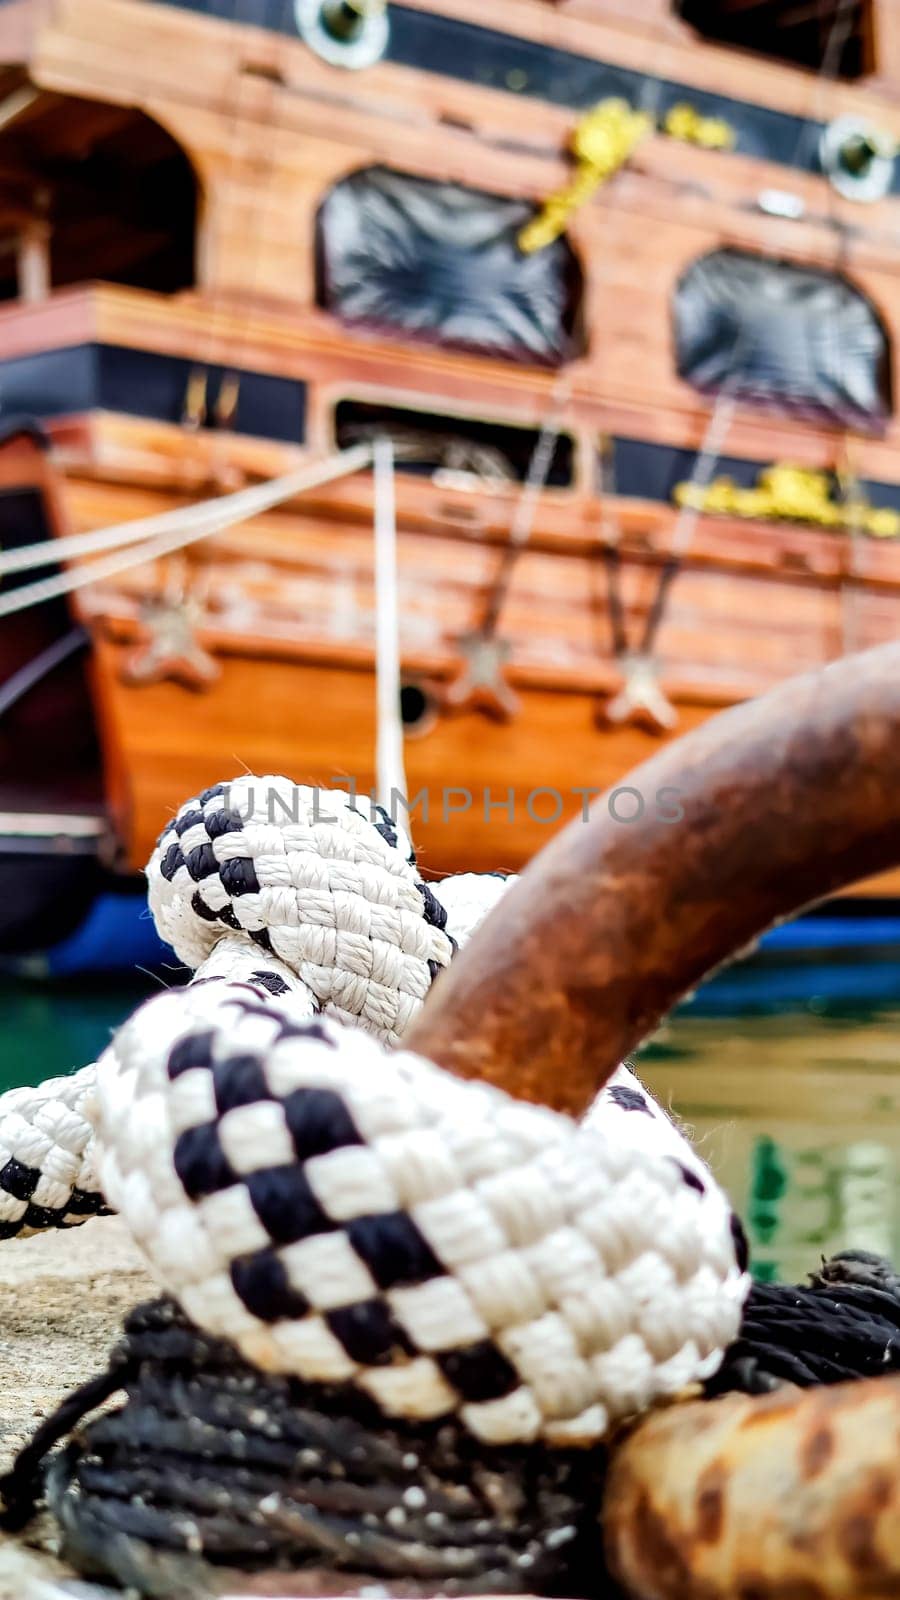 Mooring Knot, Close-Up, from Which Ropes Extend to Stern of Ship Holding it in Bay, Concept of Reliability.